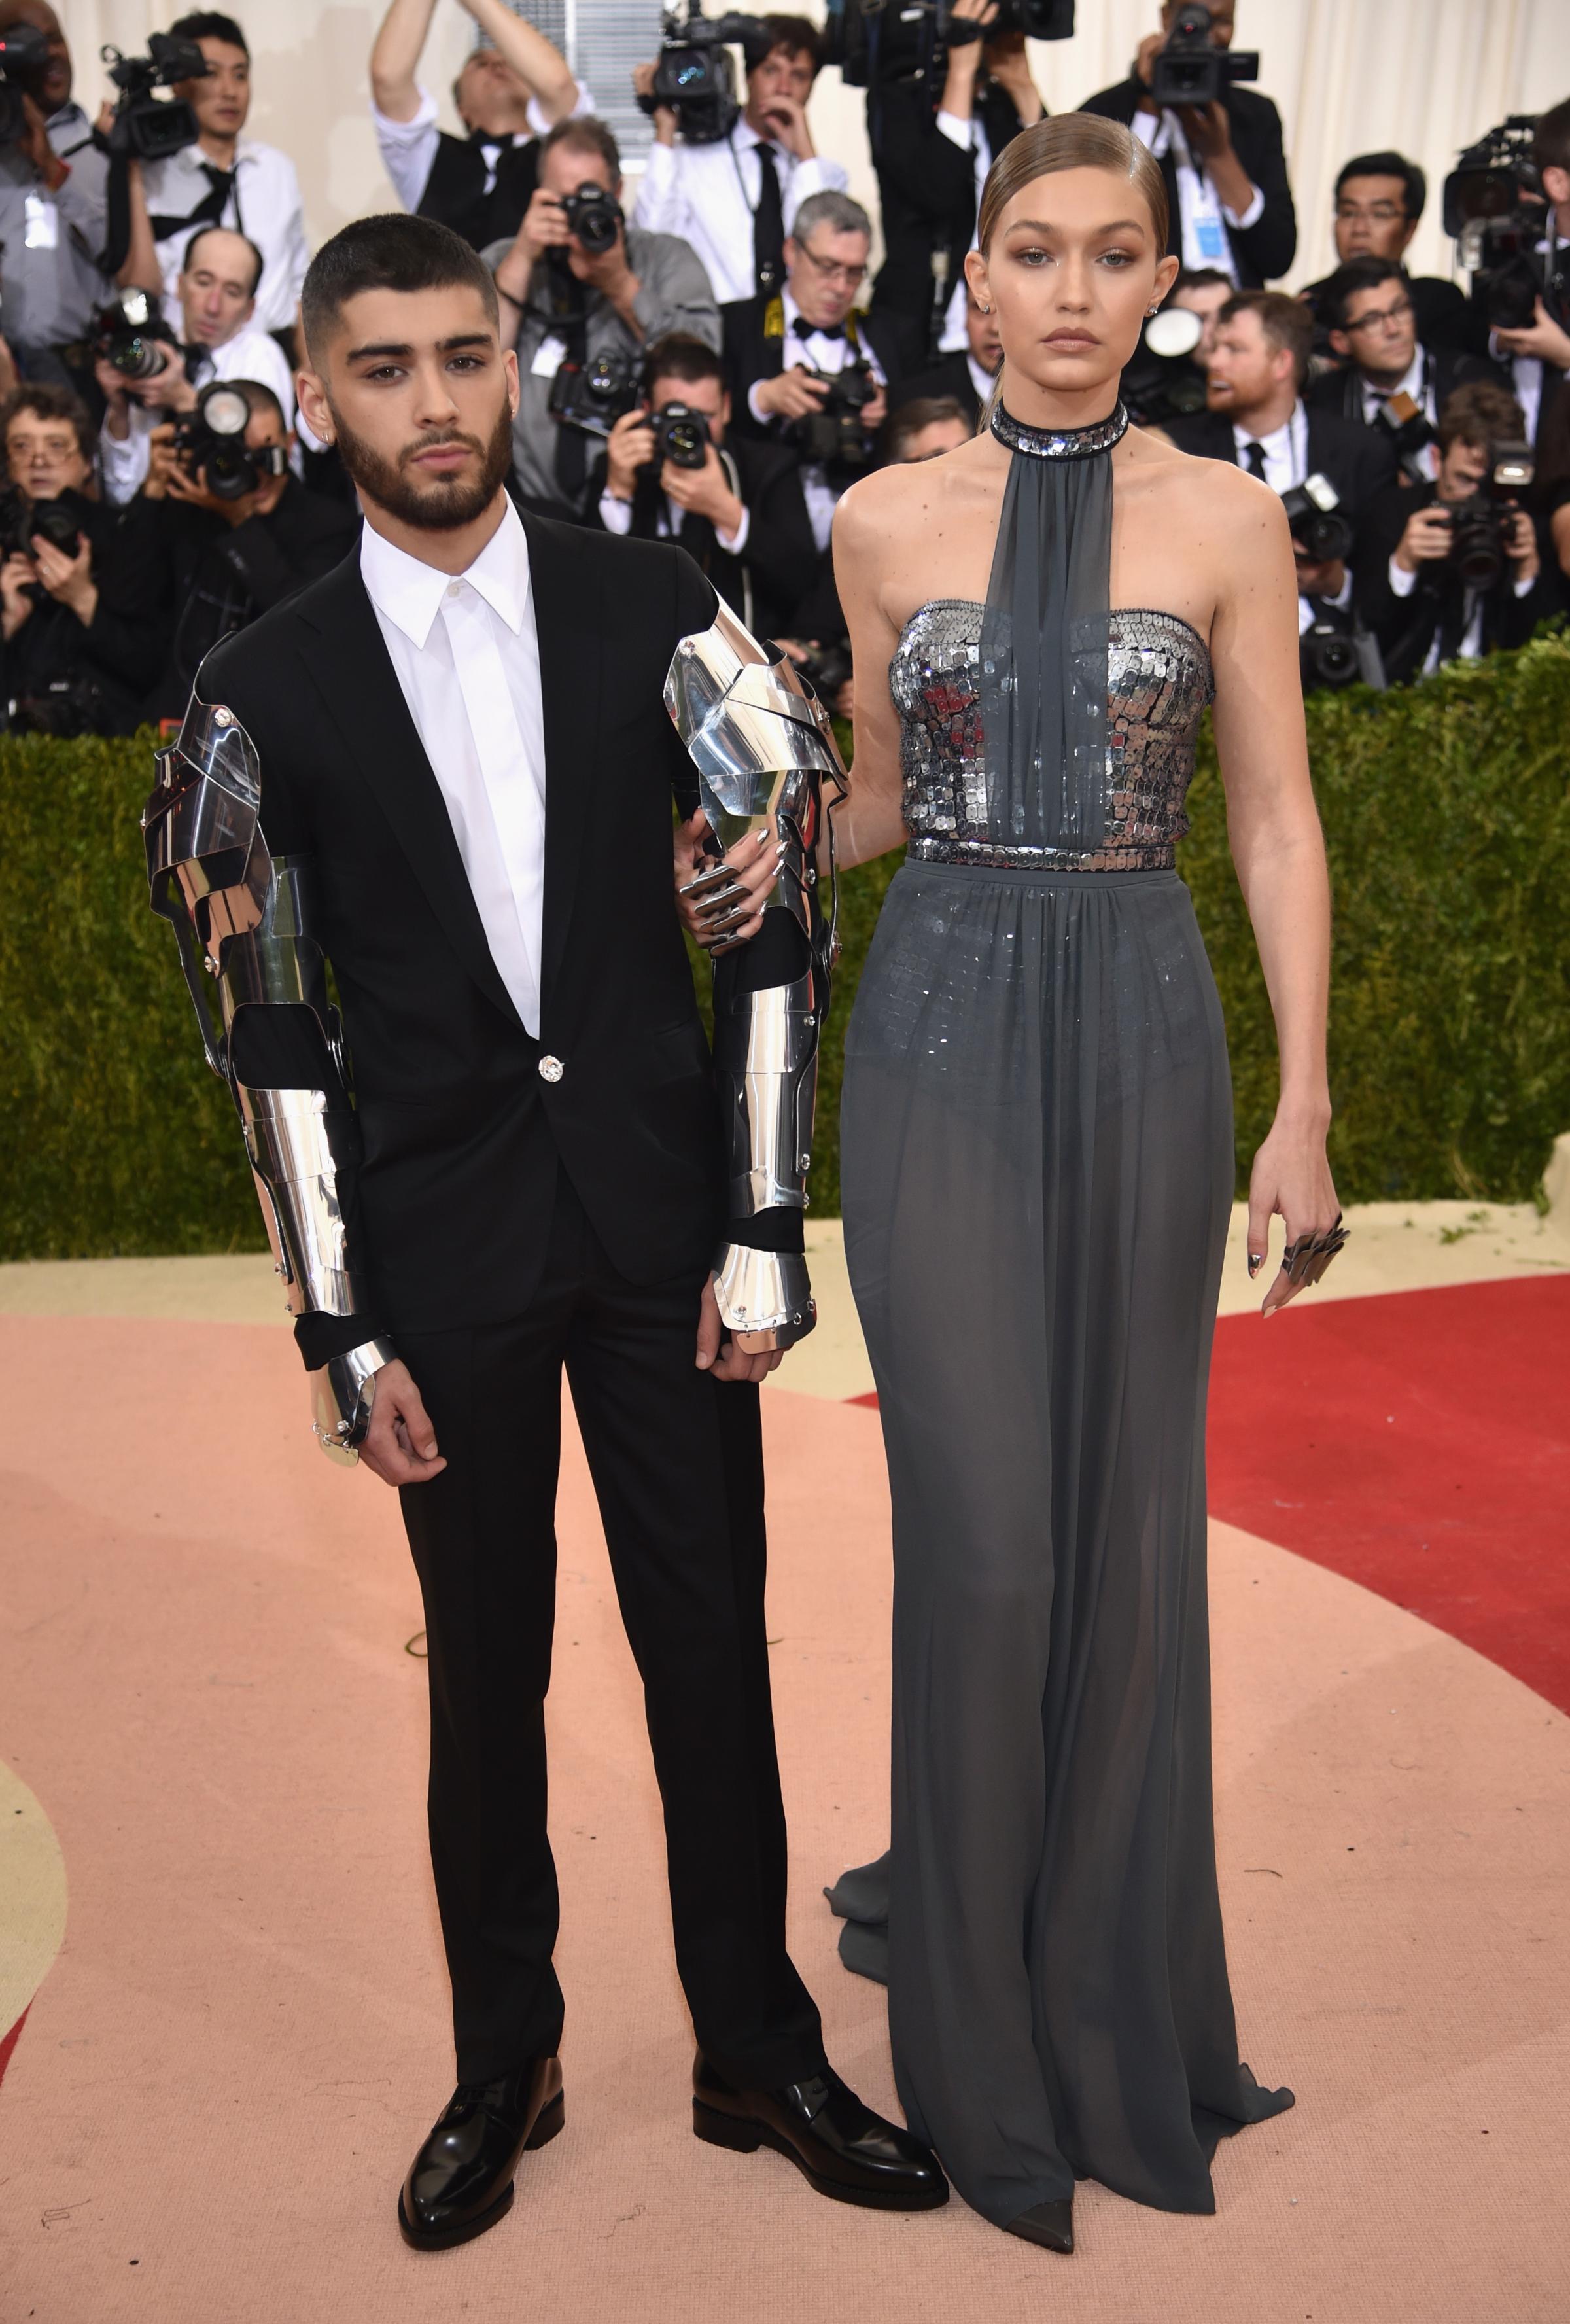 Zayn Malik and Gigi Hadid attend "Manus x Machina: Fashion In An Age Of Technology" Costume Institute Gala at Metropolitan Museum of Art on May 2, 2016 in New York City.